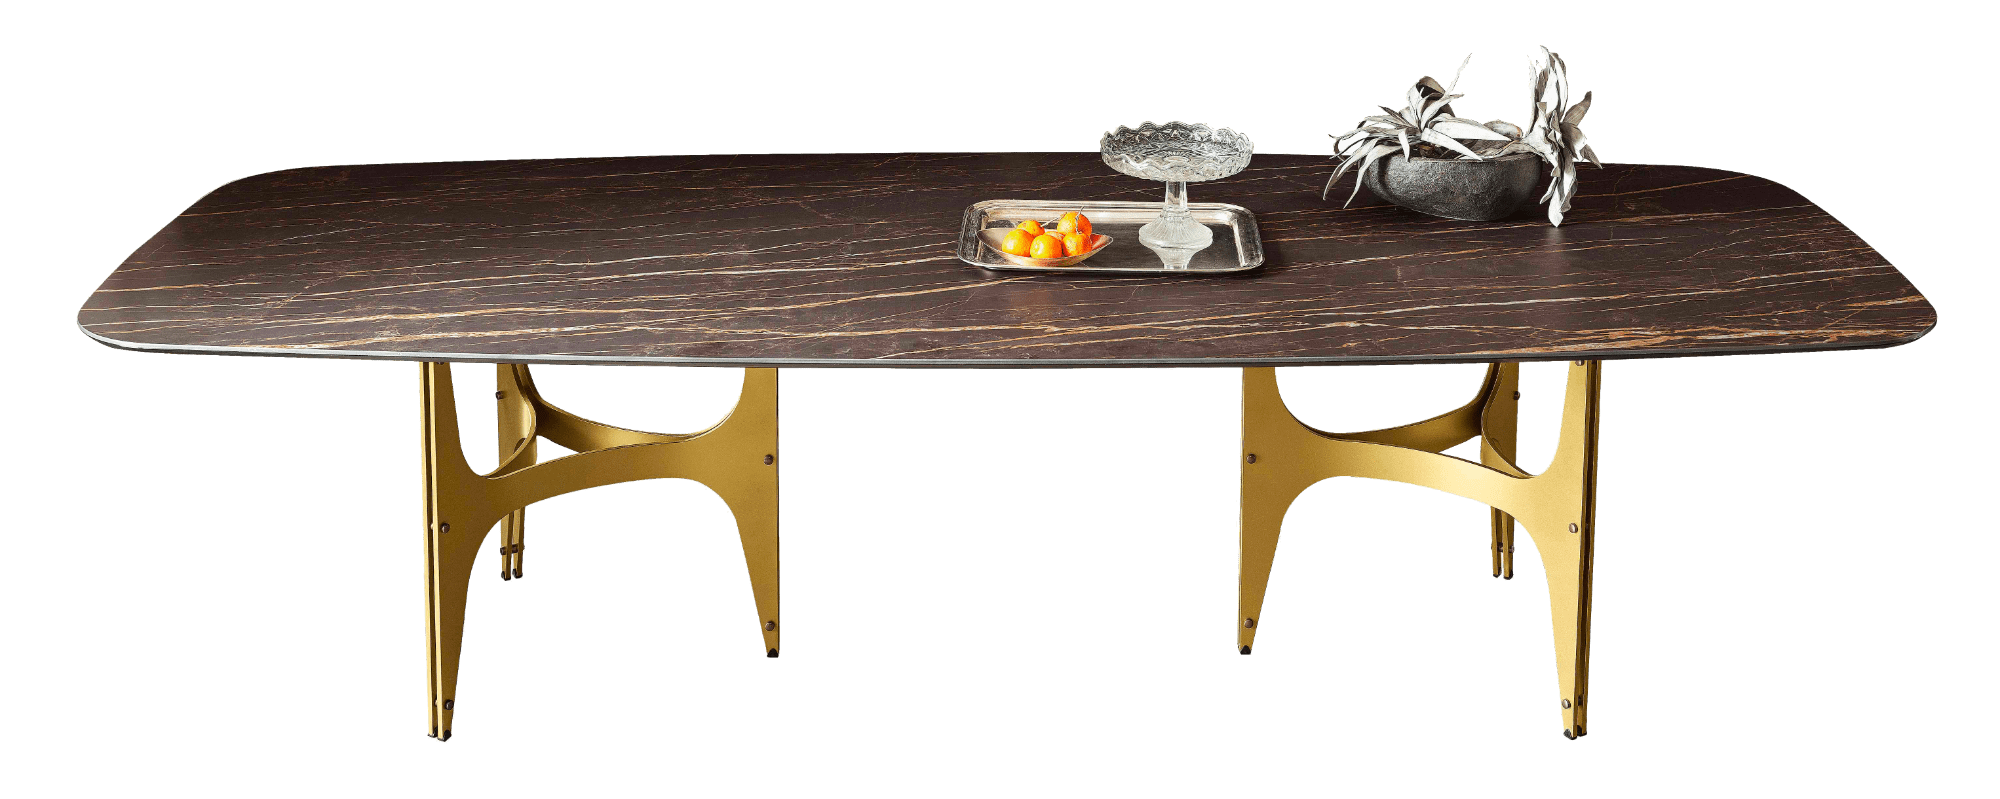 Universe Xxl Fixed table with barrel shaped top in SuperMarble